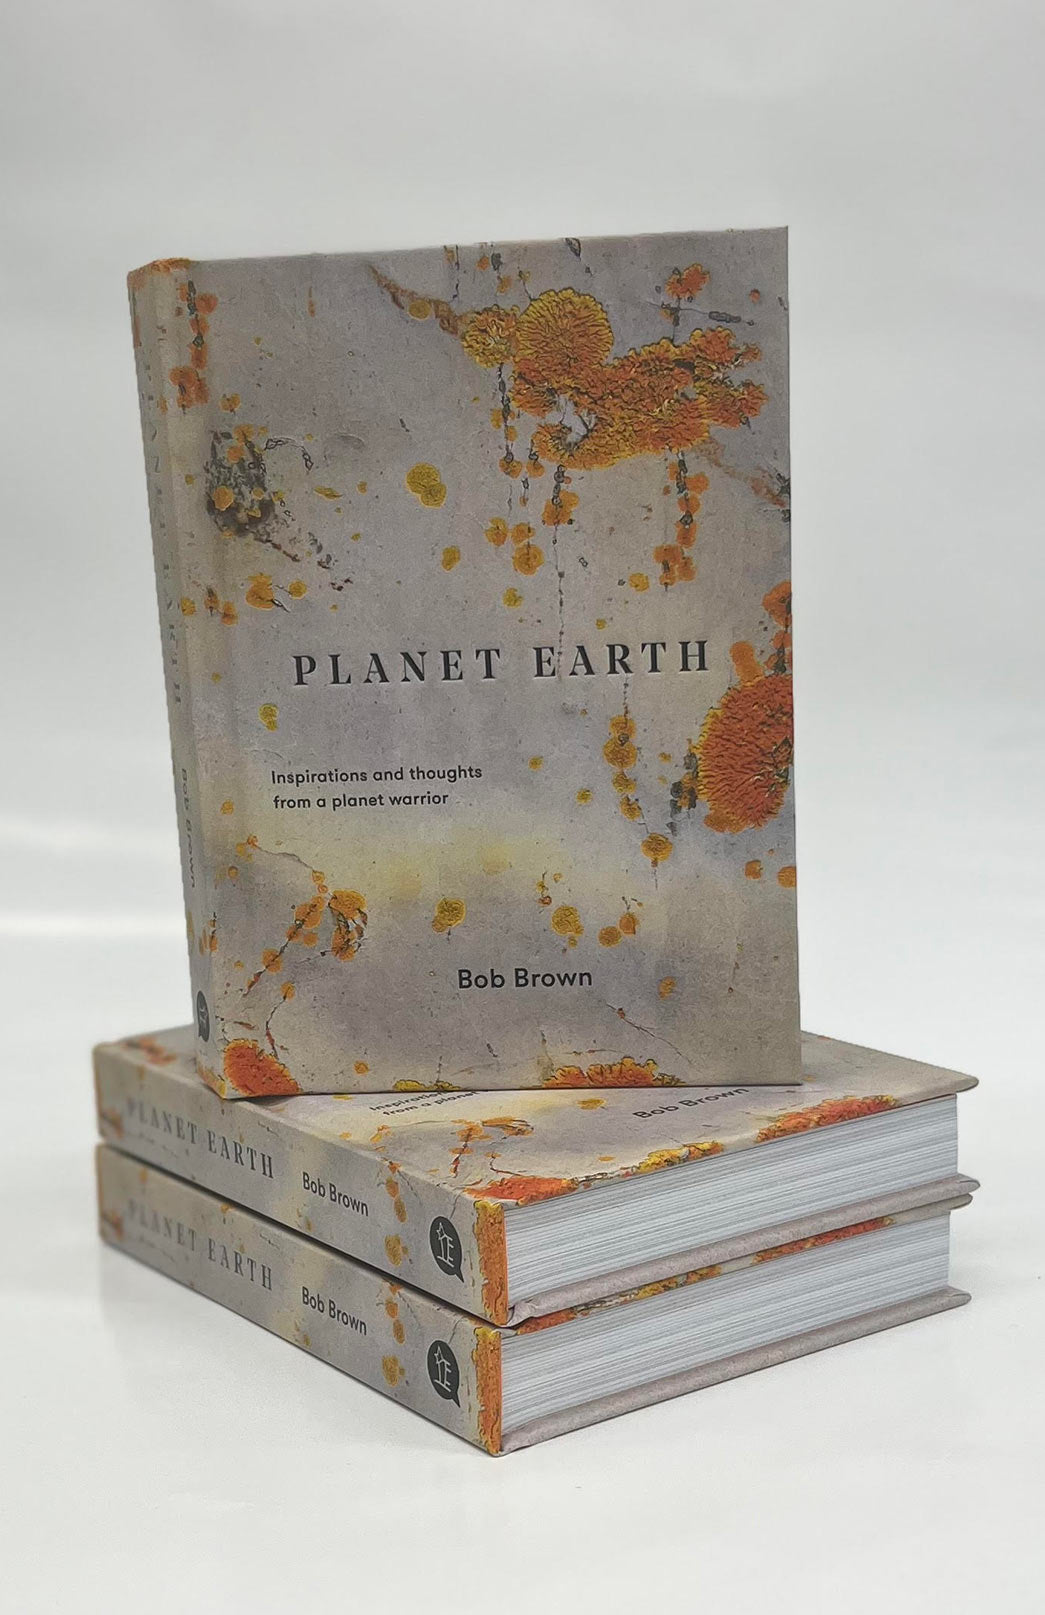 Planet Earth Book - Bob Brown signed copy Planet Earth Book - Inspirations and thoughts from a planet warrior. 
